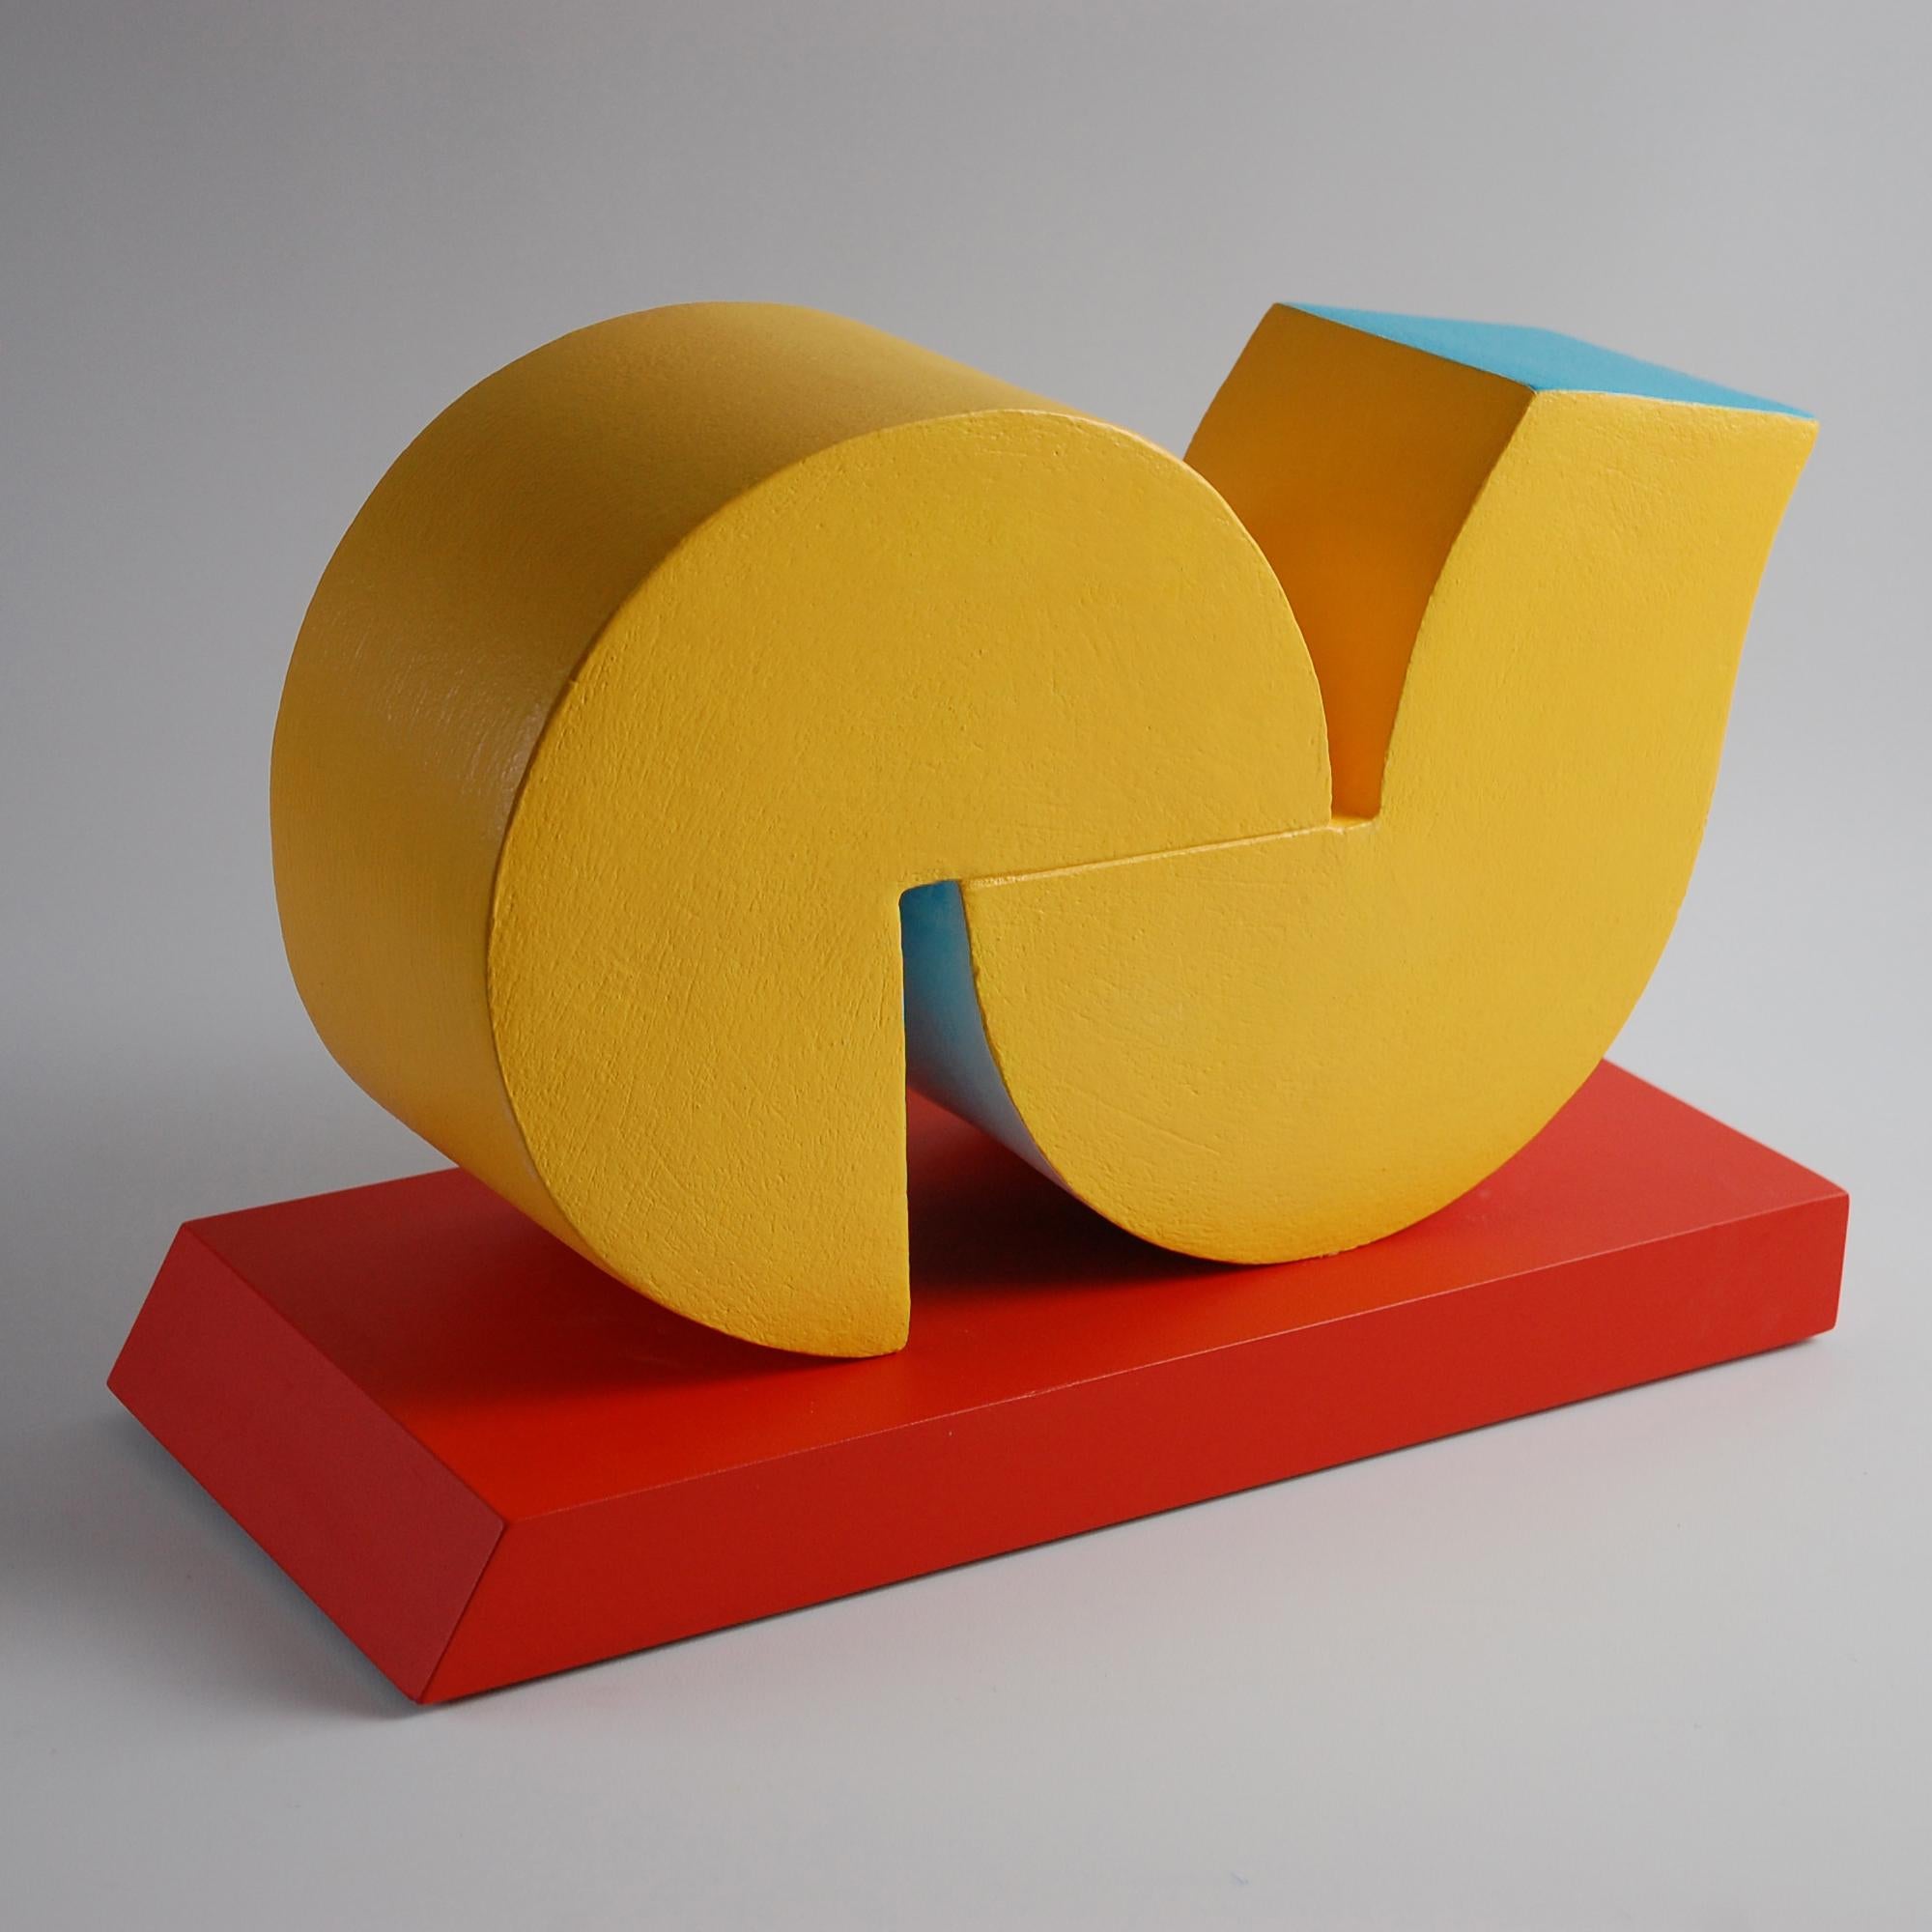 Quadrant by Patricia Volk. Fired clay constructed, painted and mounted on MDF, 27 cm × 42 cm × 18 cm.
Patricia Volk is a member of the Royal Society of Sculptors (FRSS) and an Academician of the Royal West of England Academy (RWA). Her work was